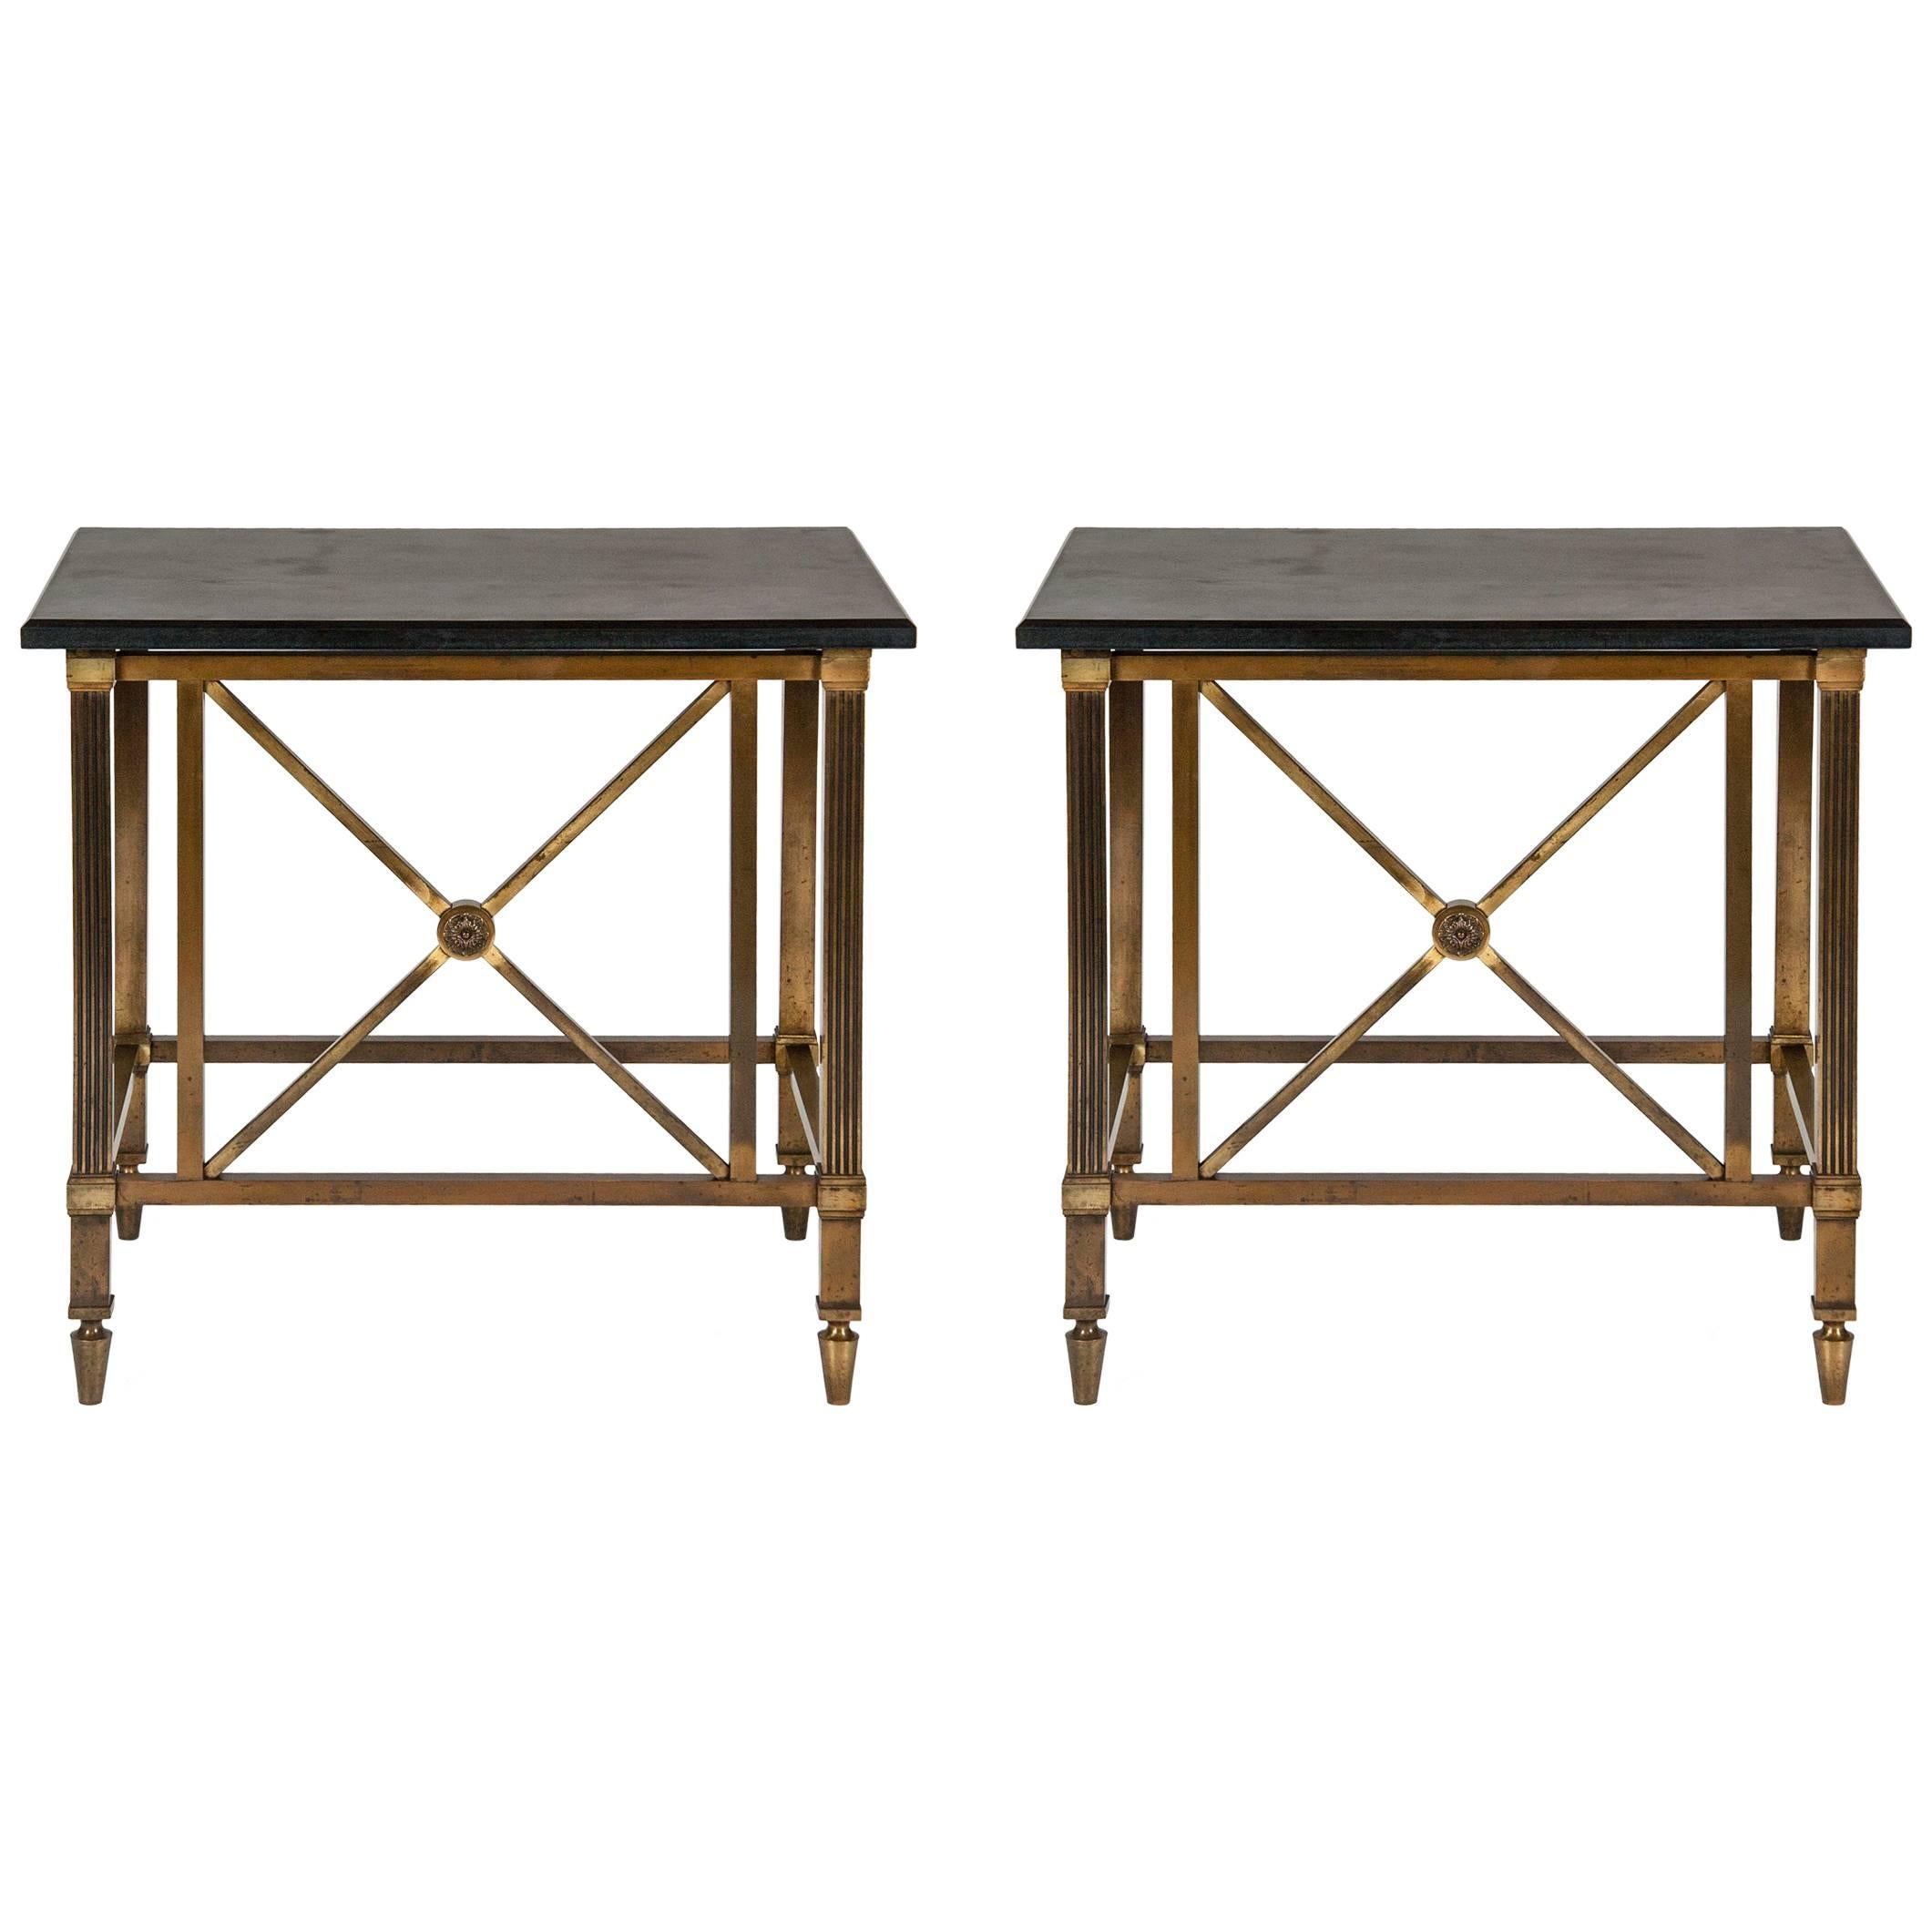 Pair of American Bronze & Polished Marble Consoles